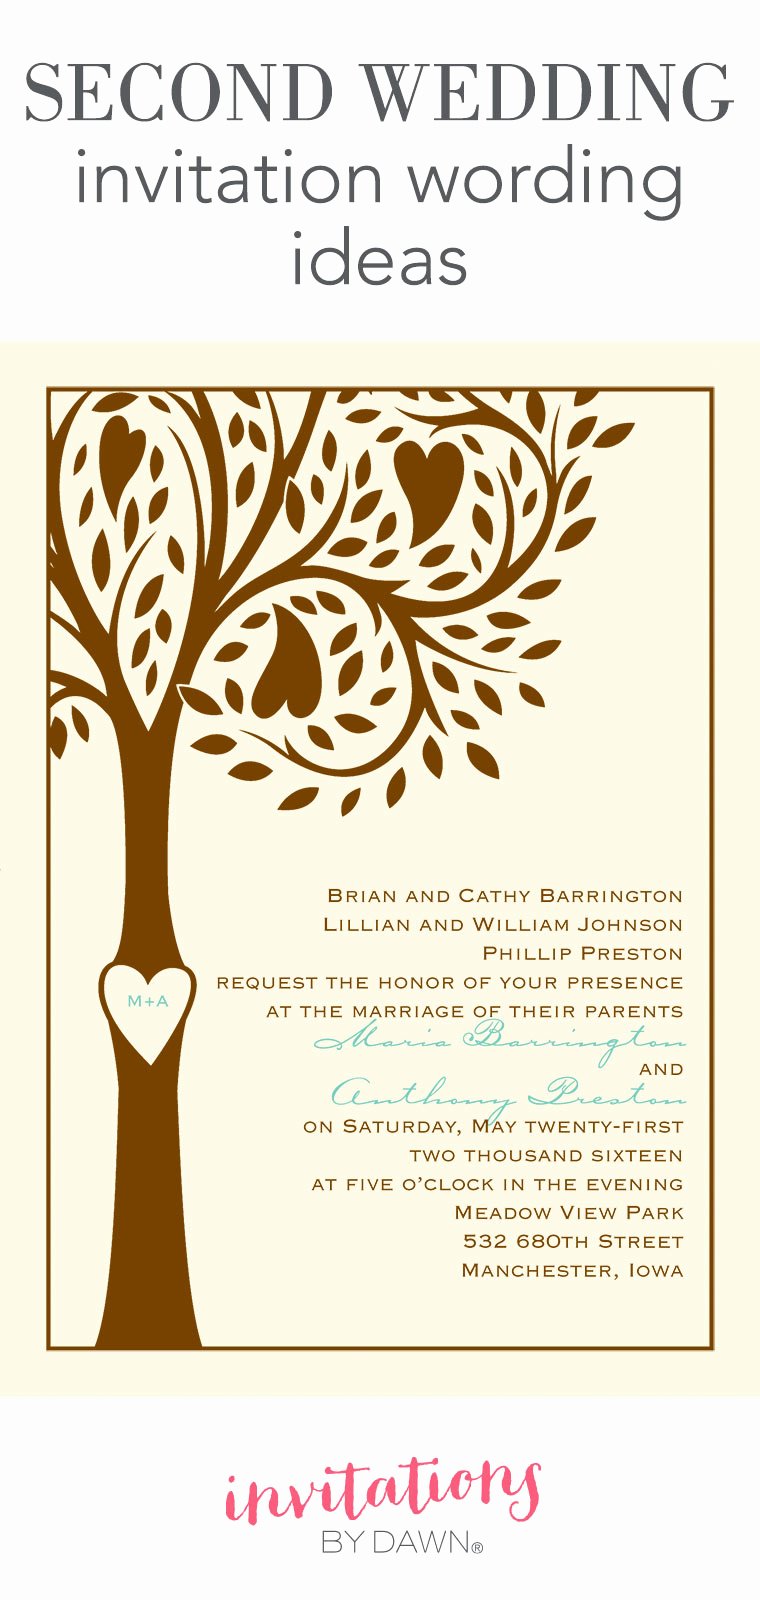 Wedding Invitation Wording Template Awesome Second Wedding Invitation Wording